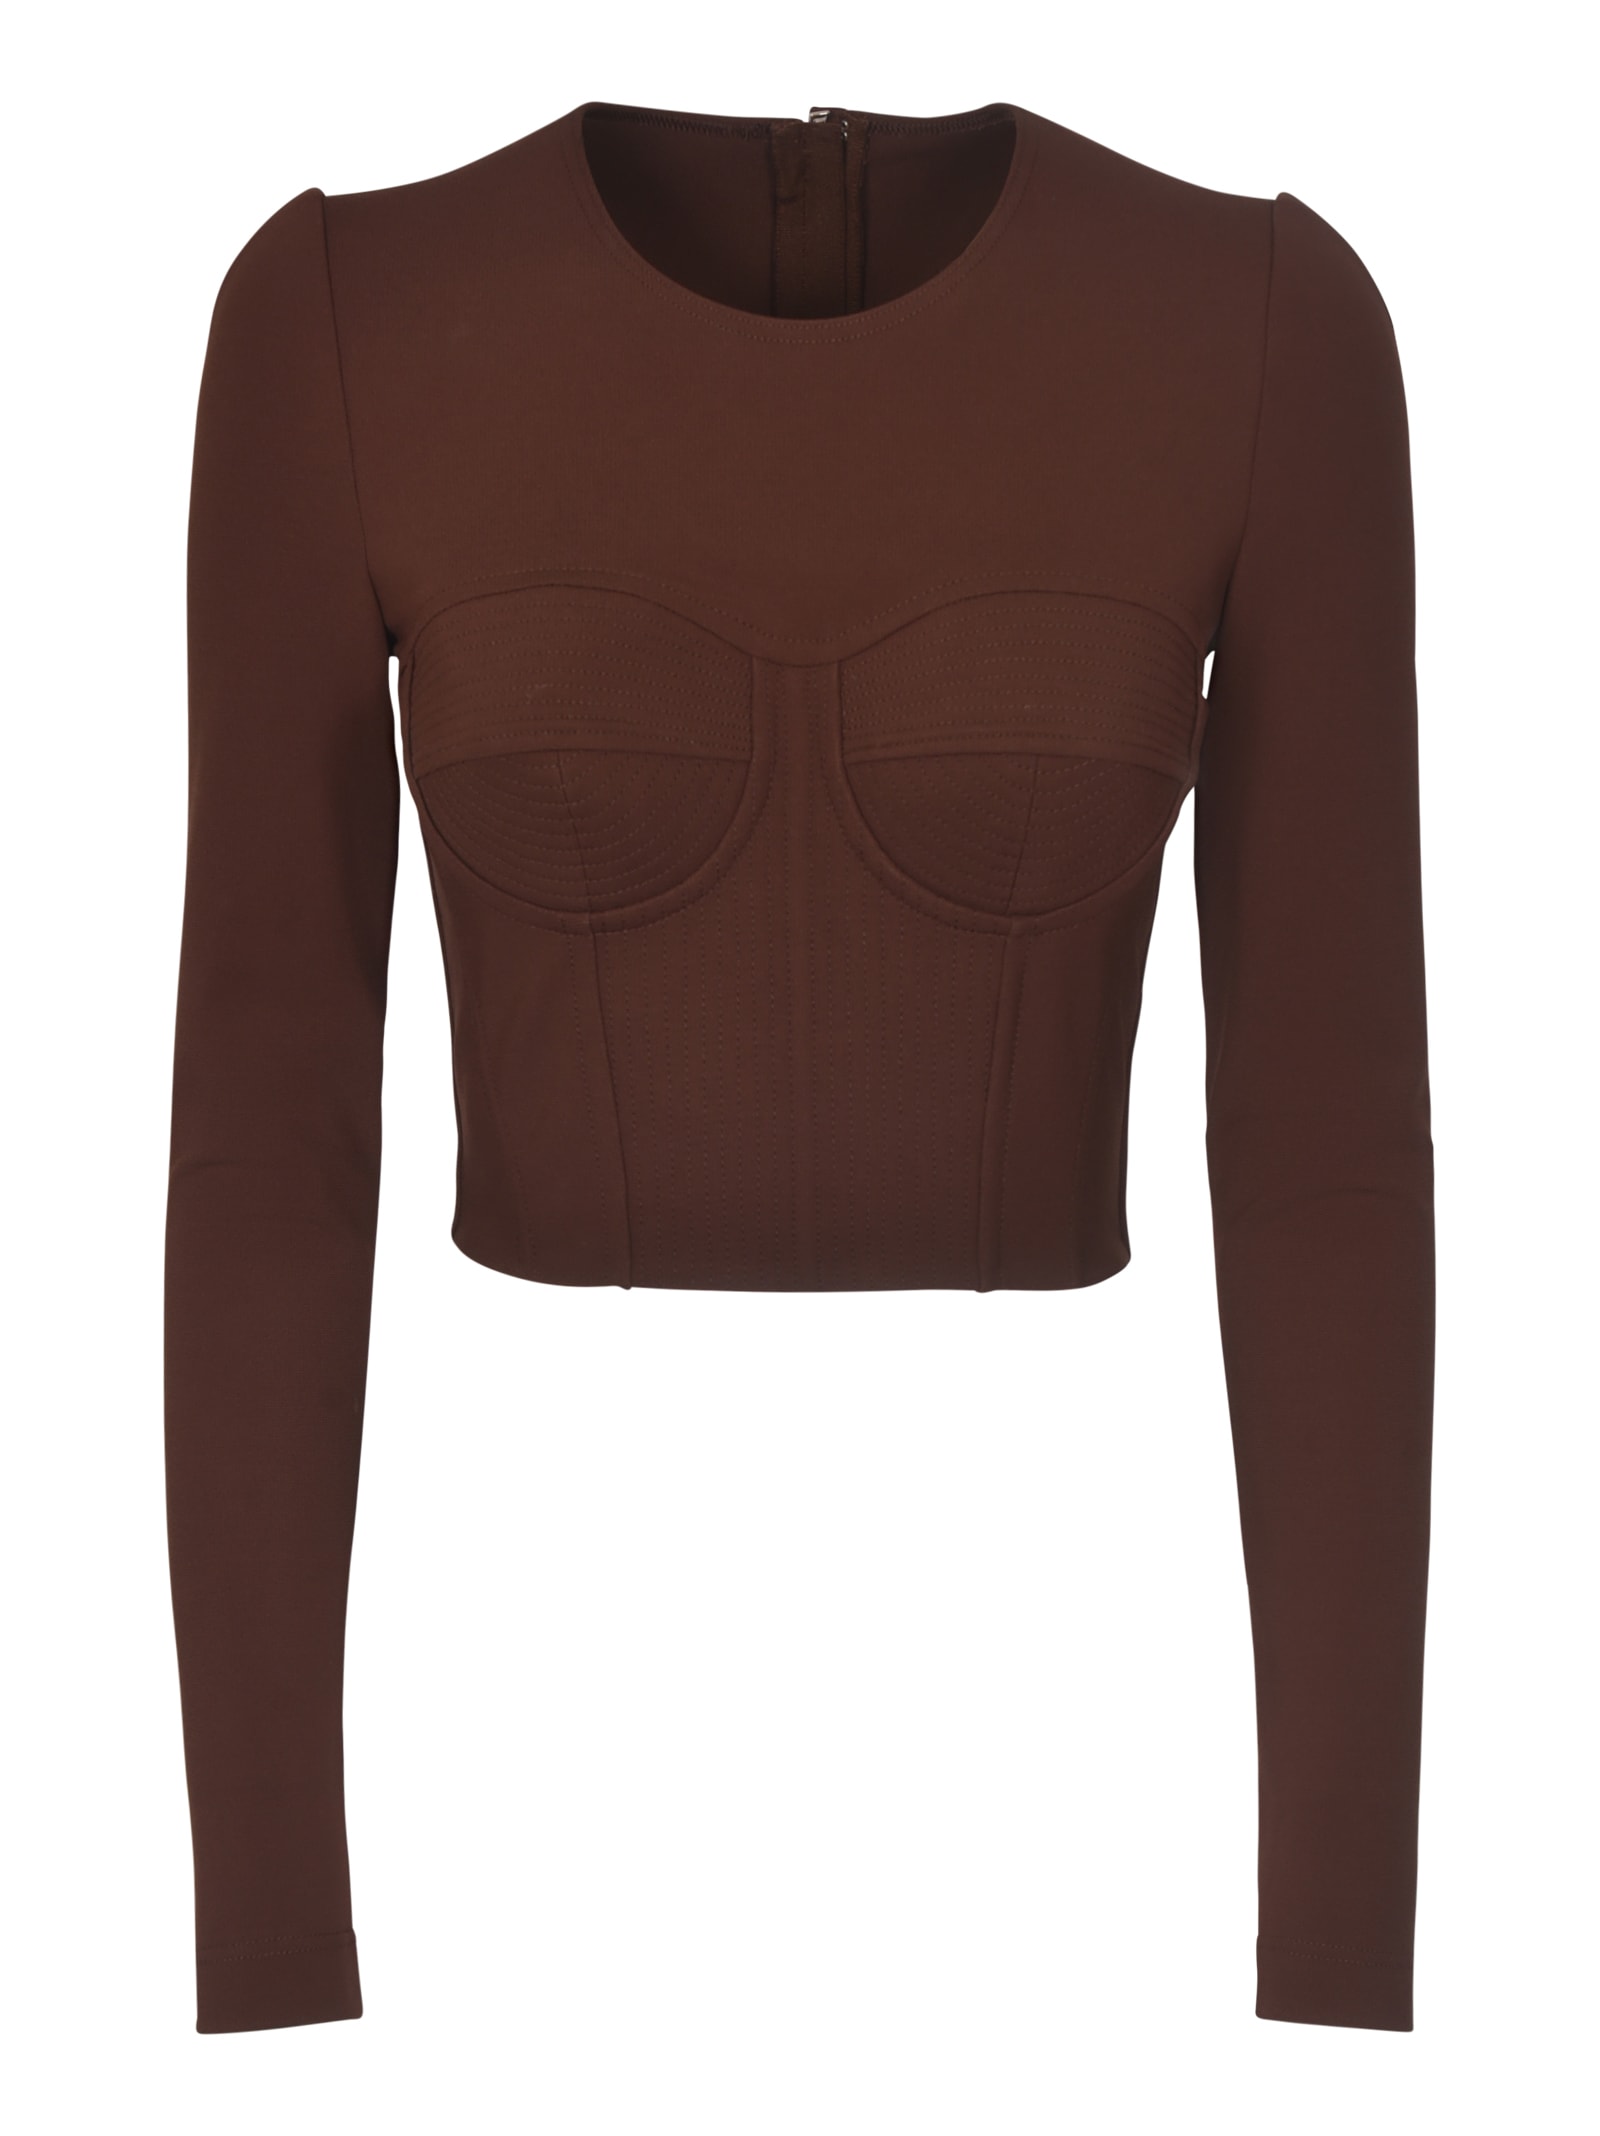 Dolce & Gabbana Cropped Long-Sleeve Top